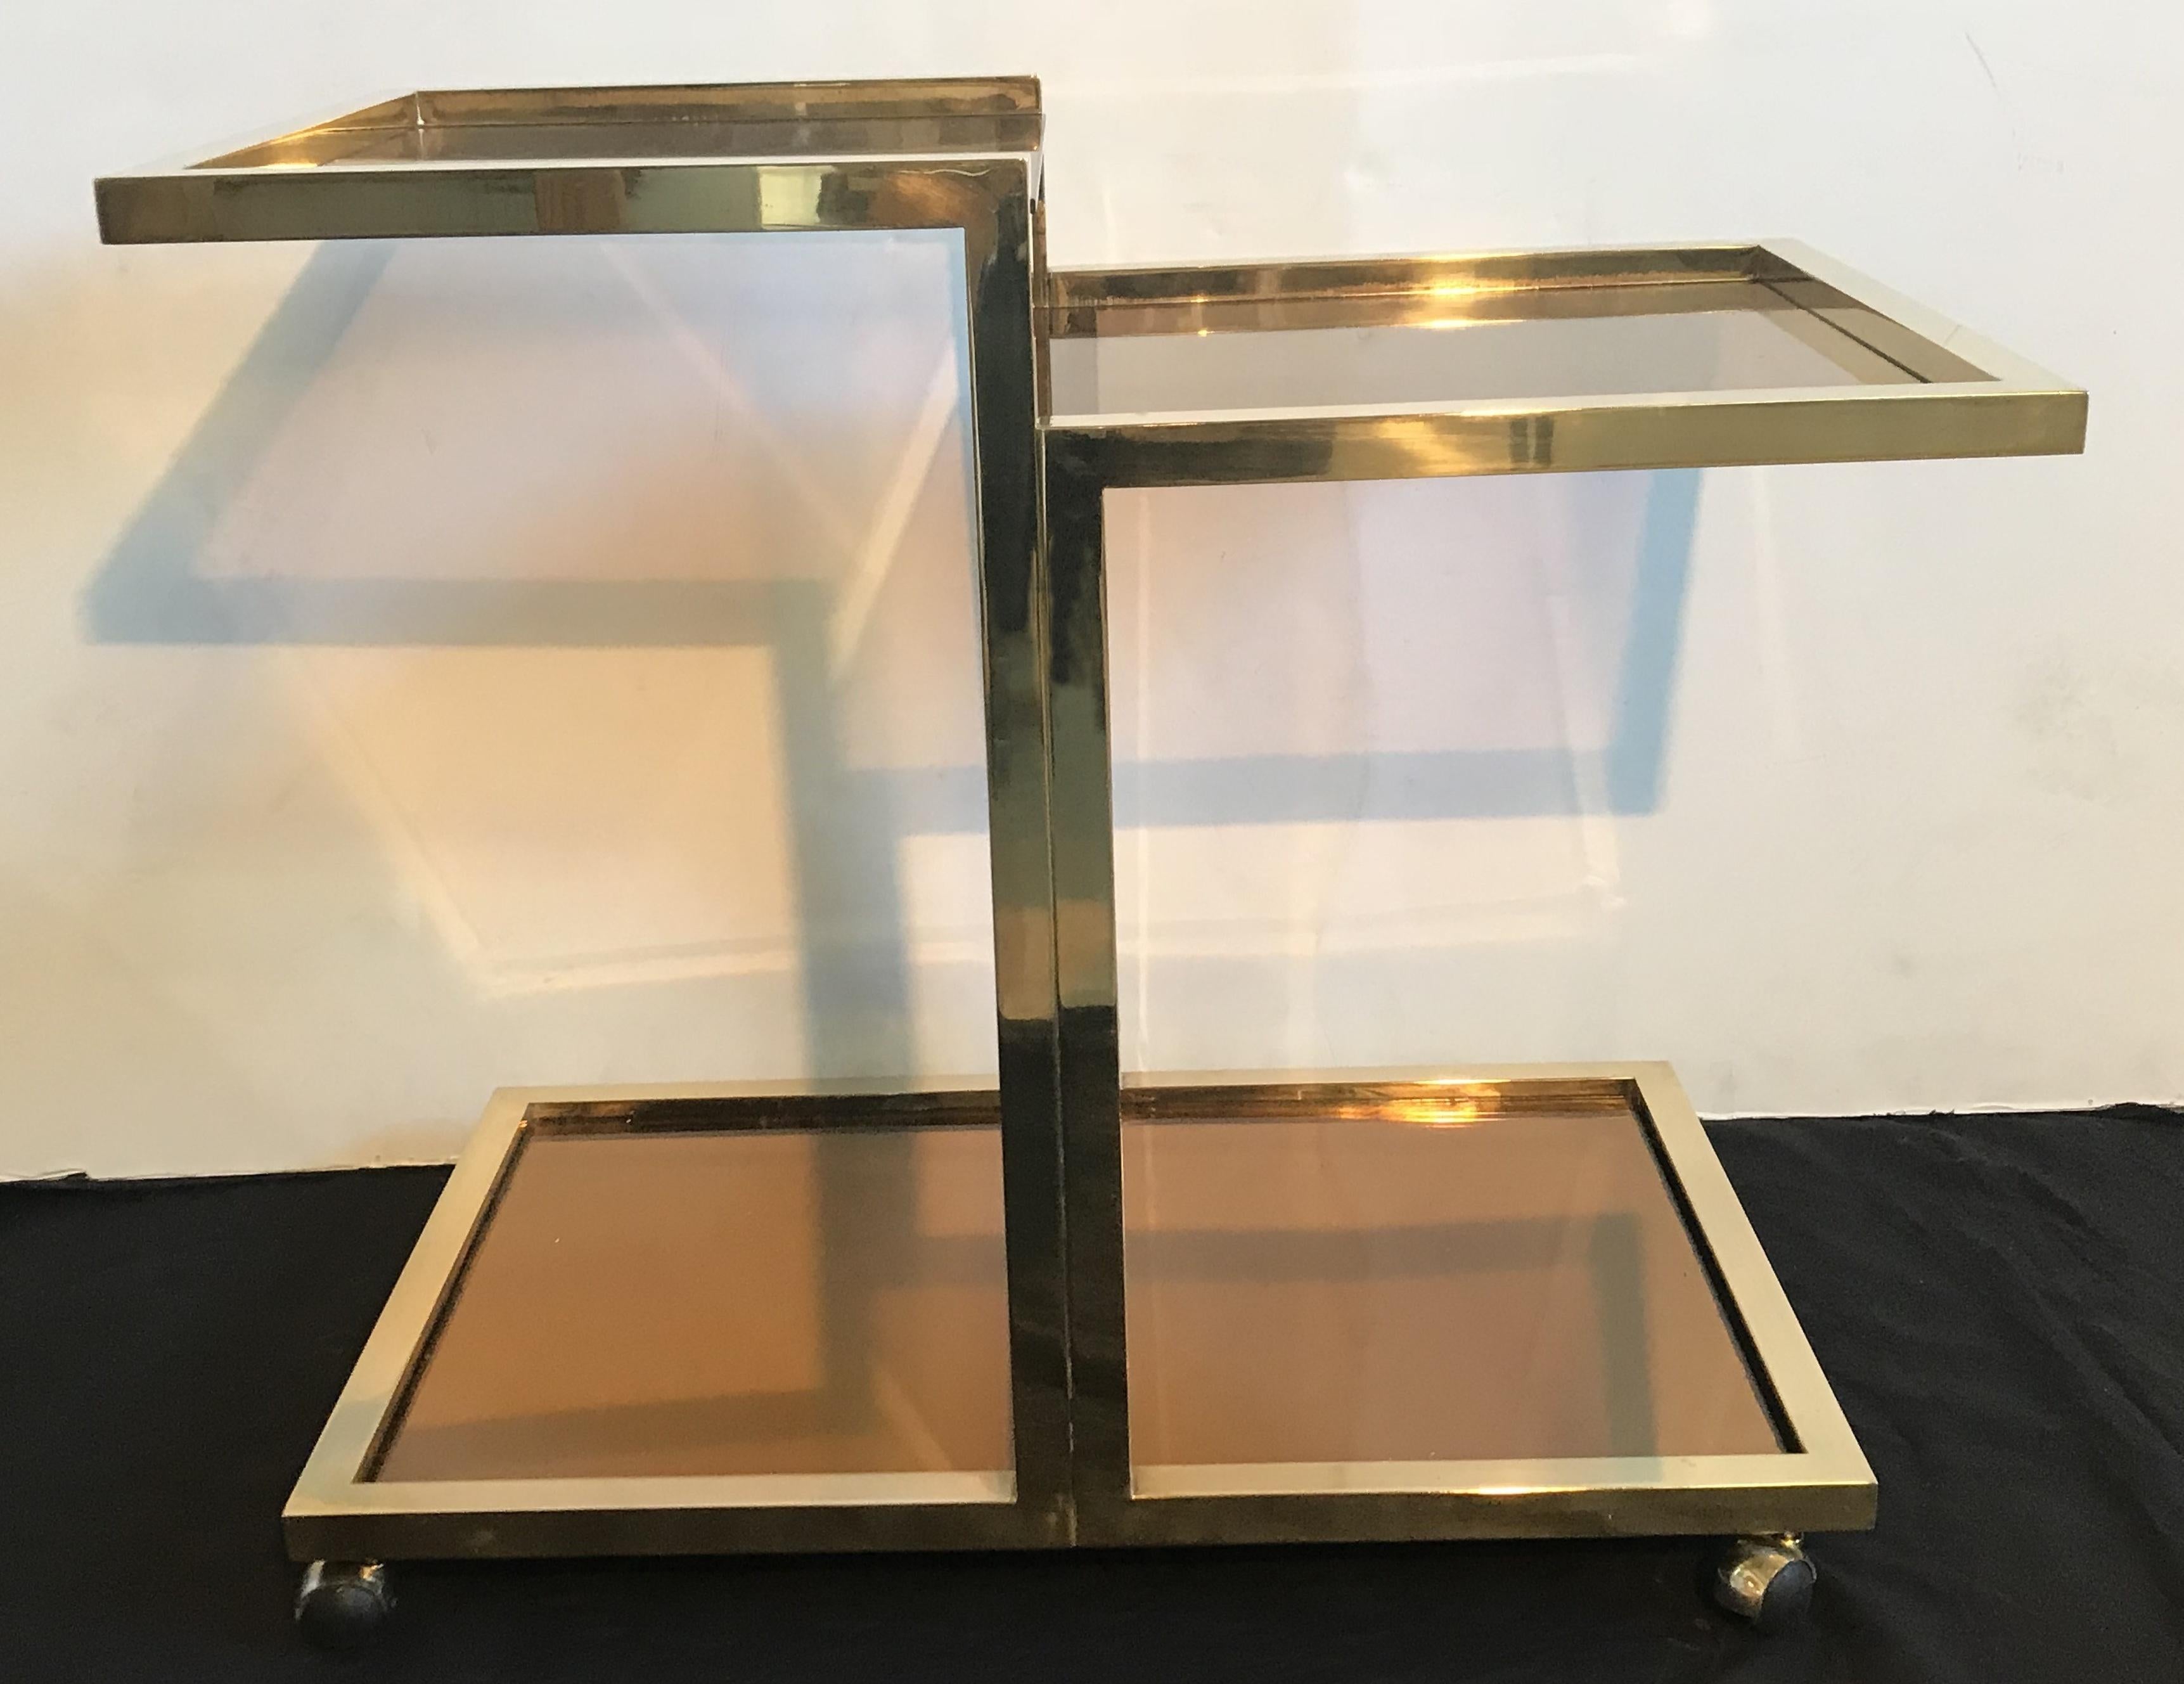 This elegant Romeo Rega cart has a brass frame construction with 3 smoked glass stories, on four wheels.

Born in 1904, Italian designer Romeo Rega is one of several 1970s designers that are associated with a combination of modernism and glamour